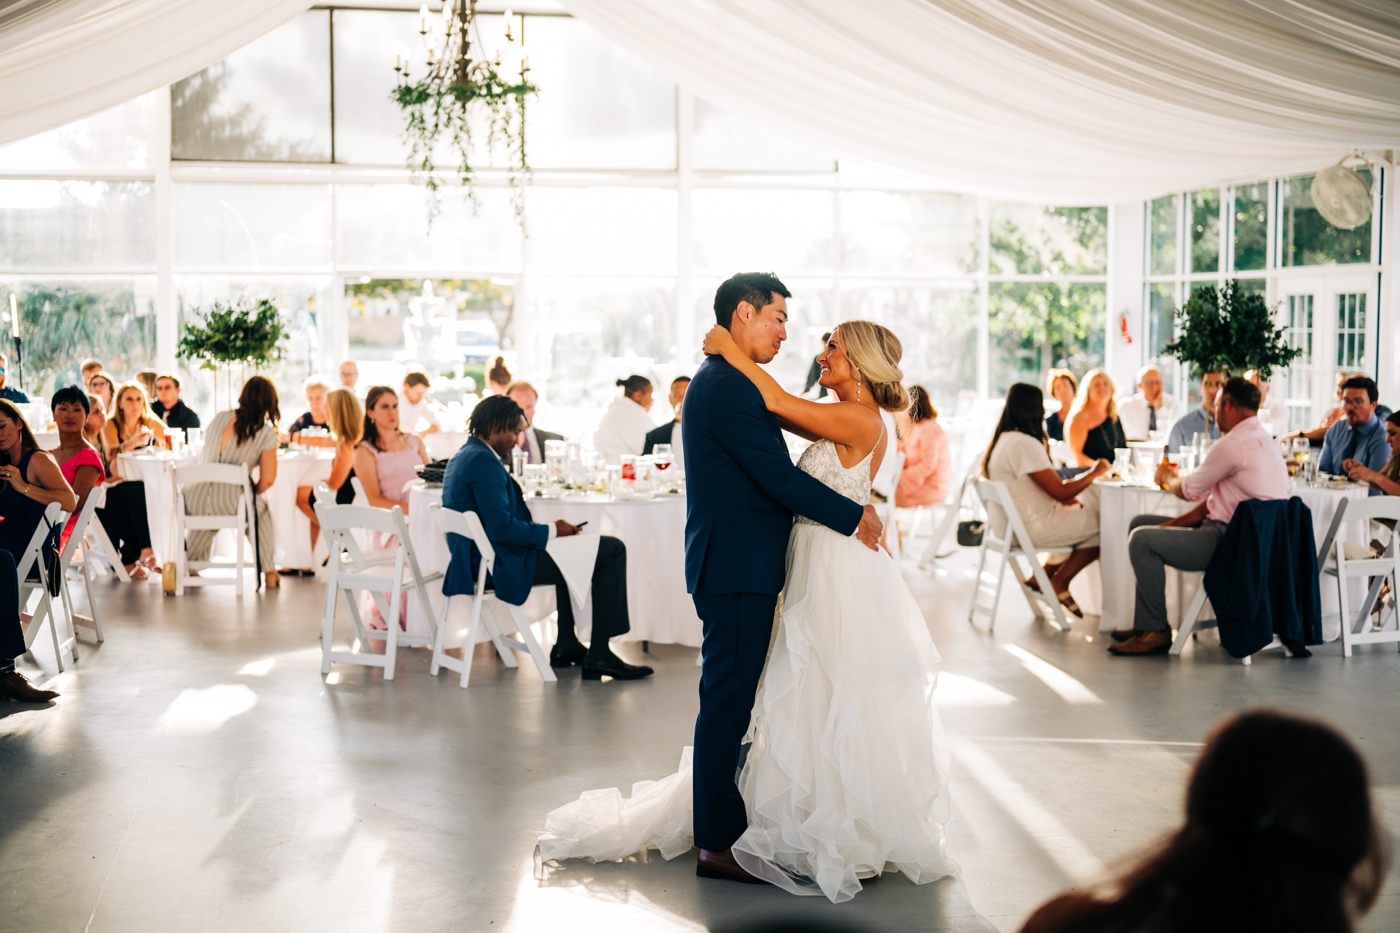 First dance at the Garden Pavilion